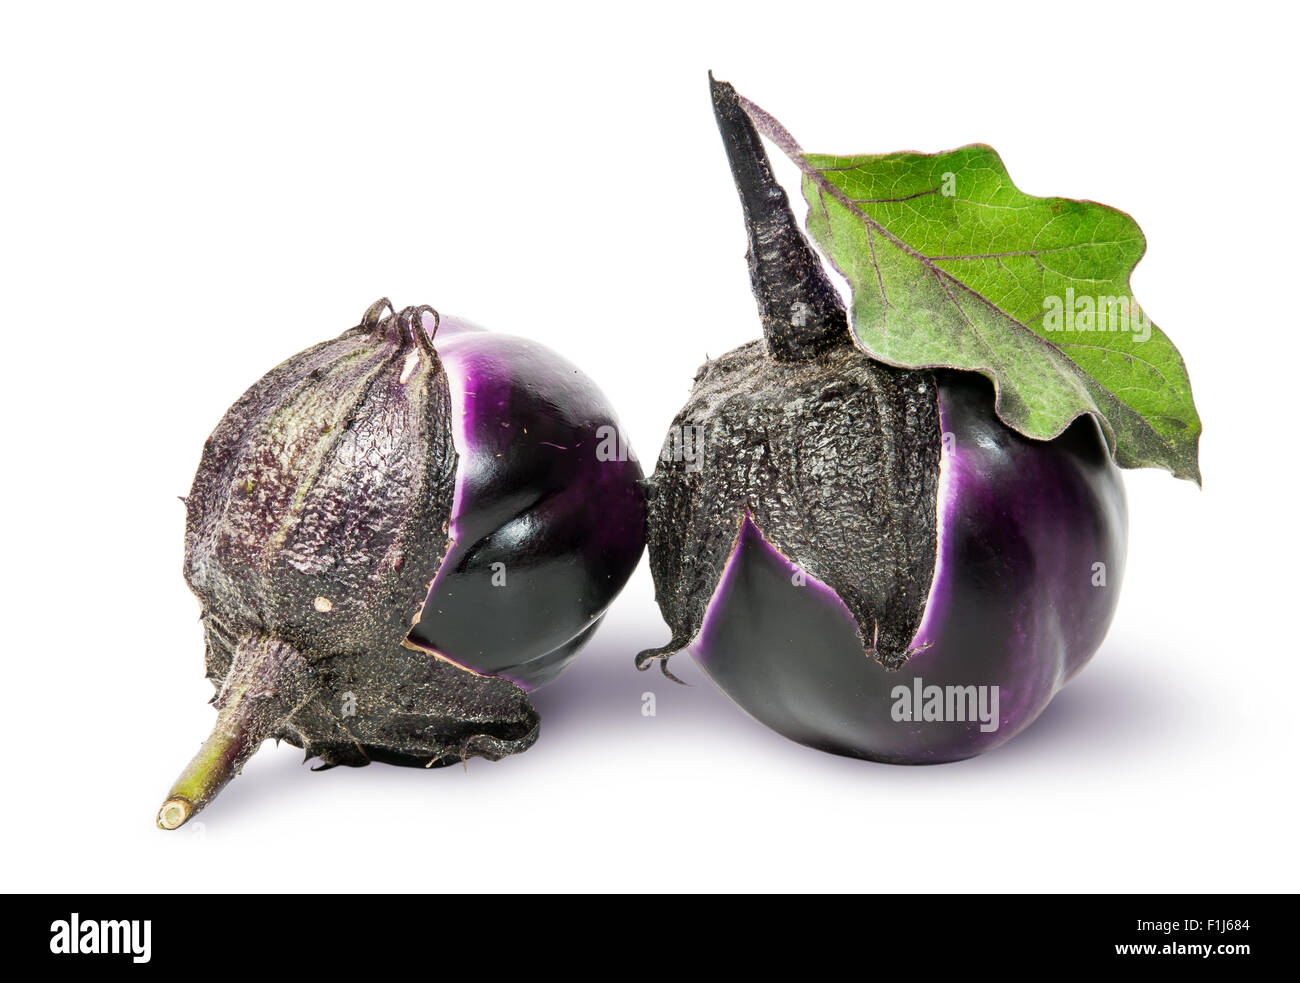 Two round ripe eggplant with green leaf rotated isolated on white background Stock Photo